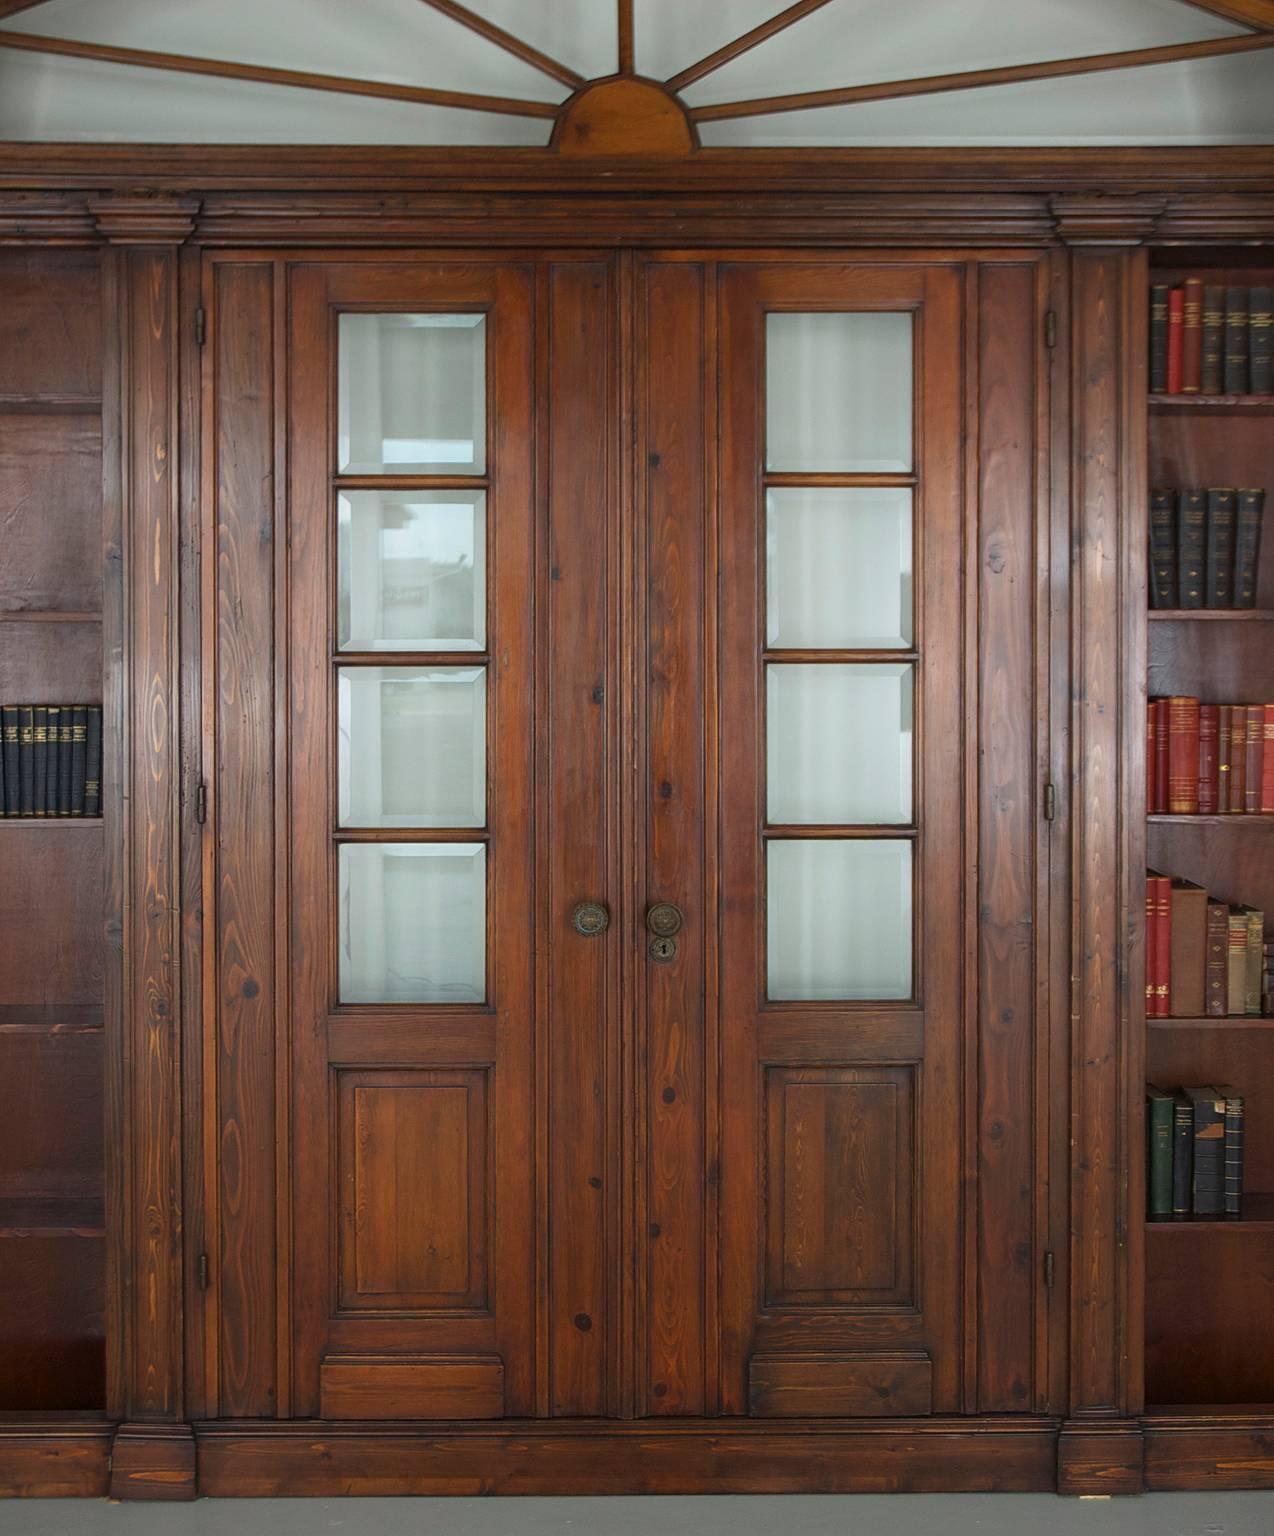 An impressive and large architectural pass-through or wall unit with bookcases flanking each side of two entry doors, over which spans a beveled glass transom in the shape of a sunburst that is encased in a rectangular panel decorated with gesso